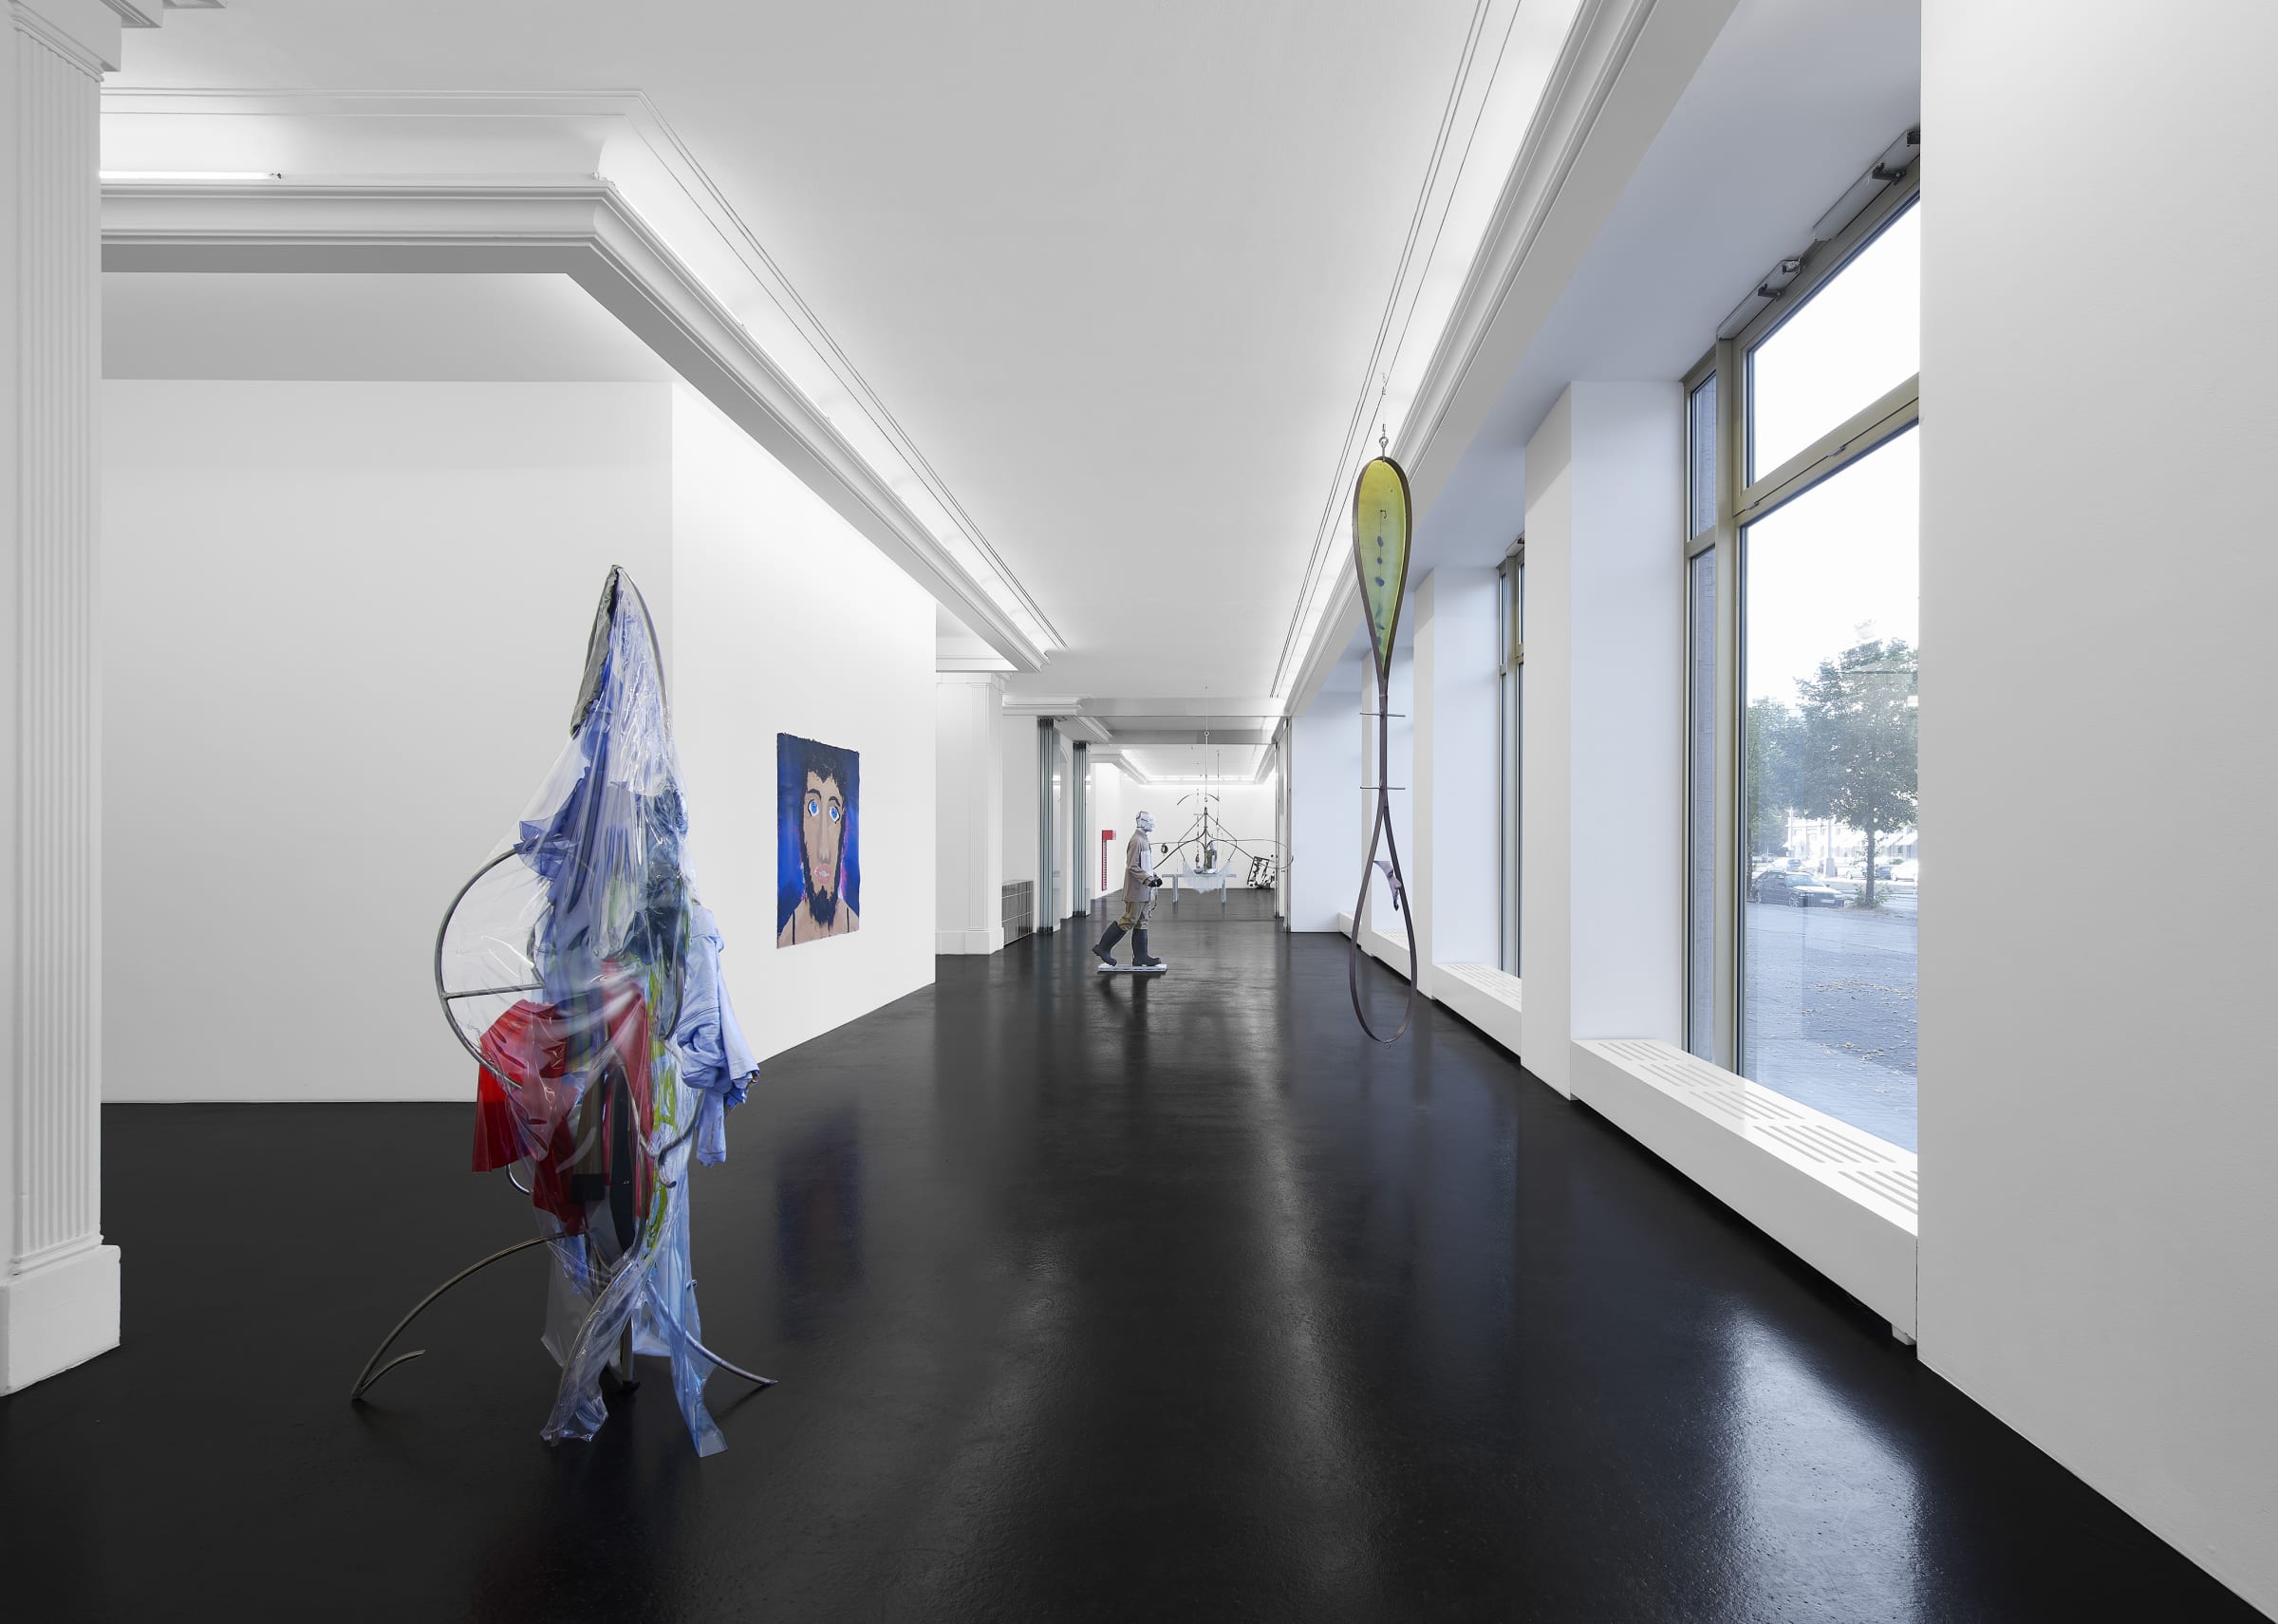 Rebecca ACKROYD, Steffen BUNTE, Donna HUANCA, Dorothy IANNONE, Ad MINOLITI, Jack O'BRIEN and Manuel SOLANO Strange Messengers Installation View September 14 – October 26, 2018 Peres Projects, Berlin Photographed by: Matthias Kolb